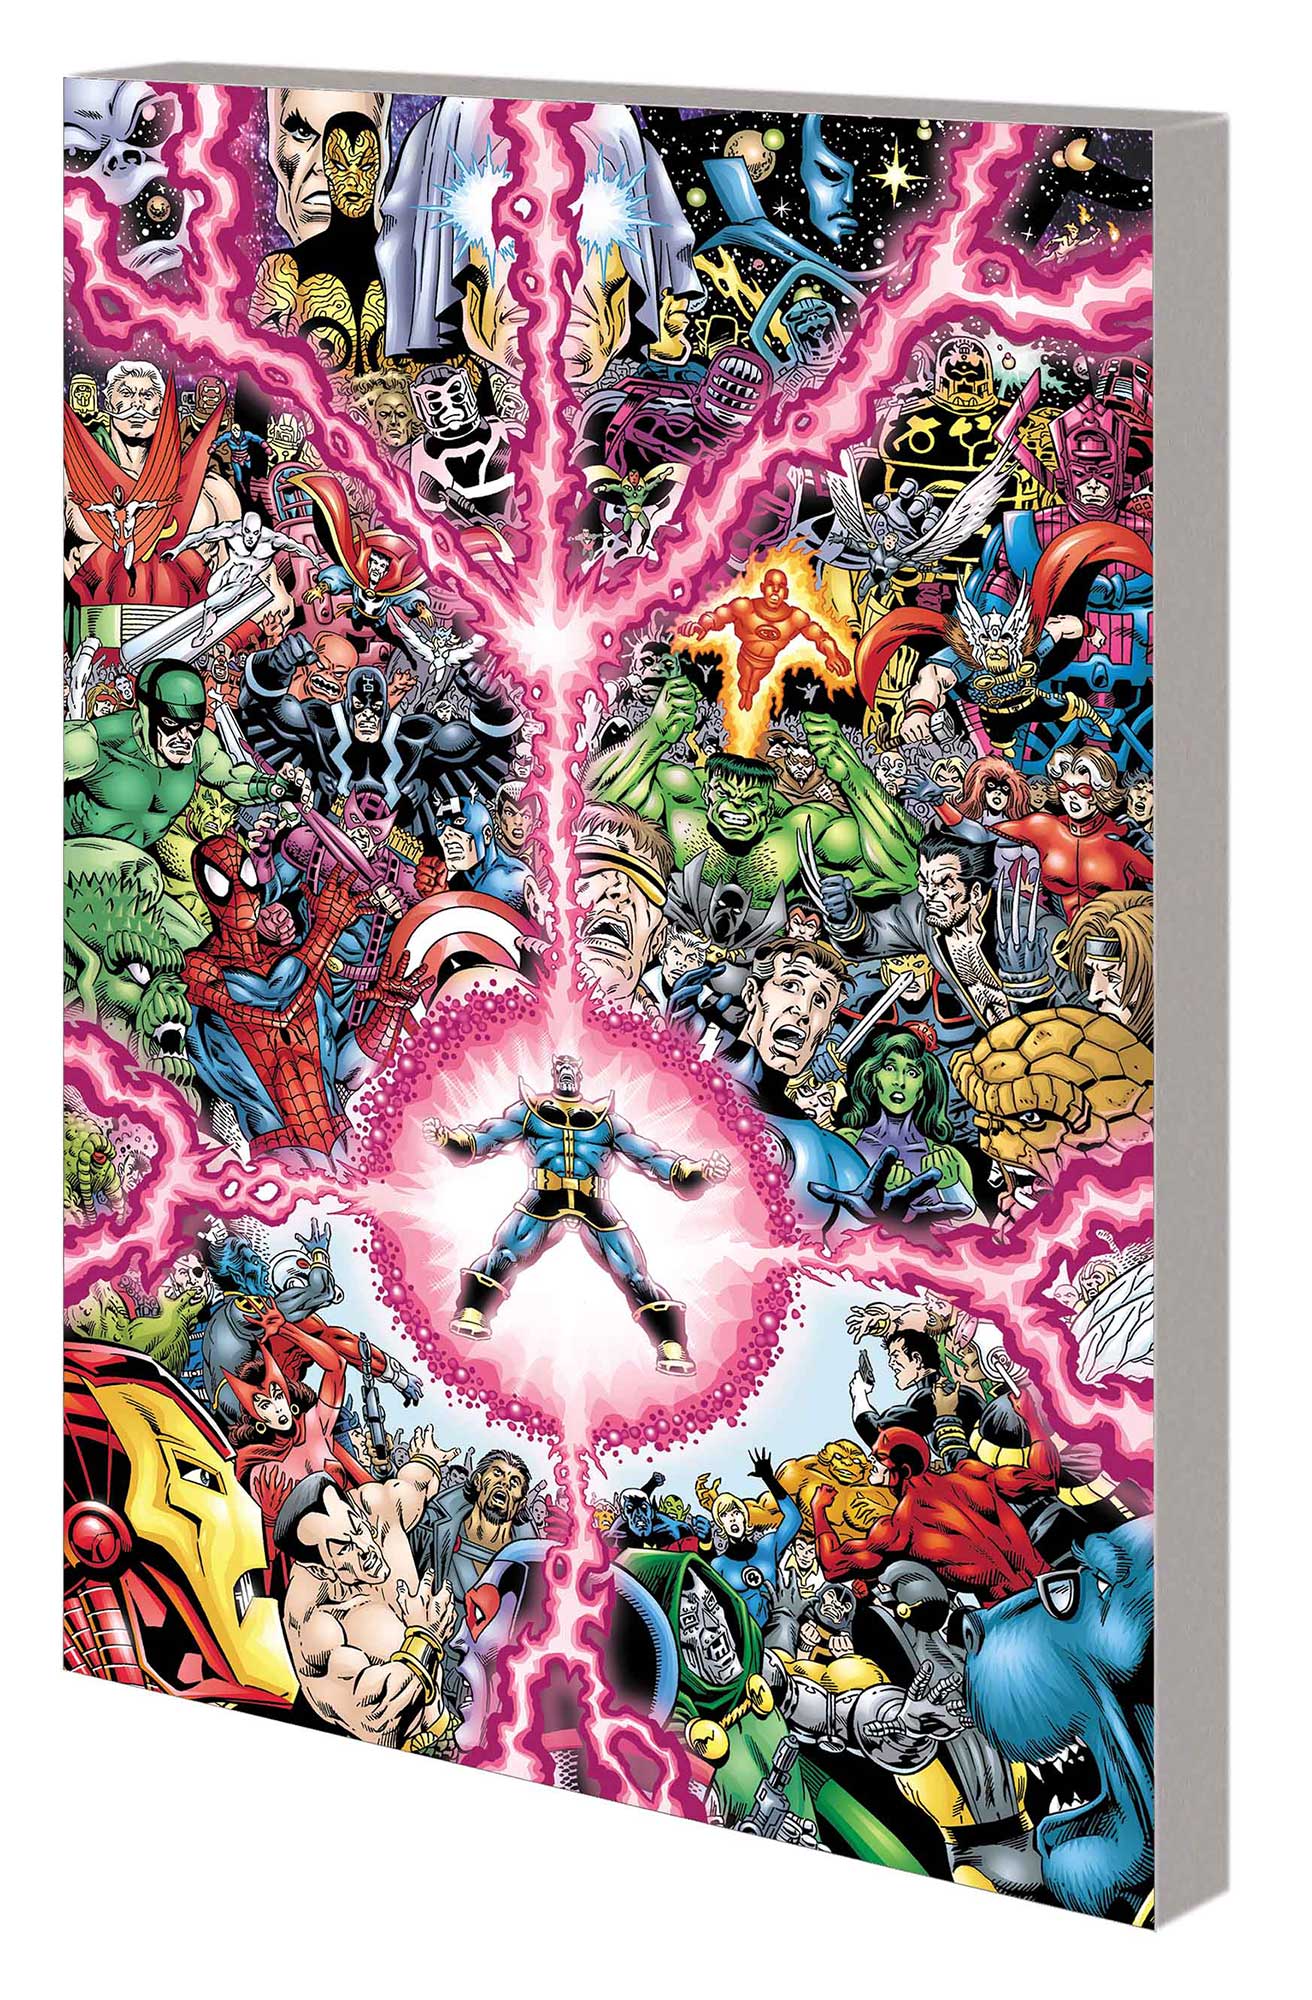 MARVEL UNIVERSE: THE END TPB - NEW PRINTING!